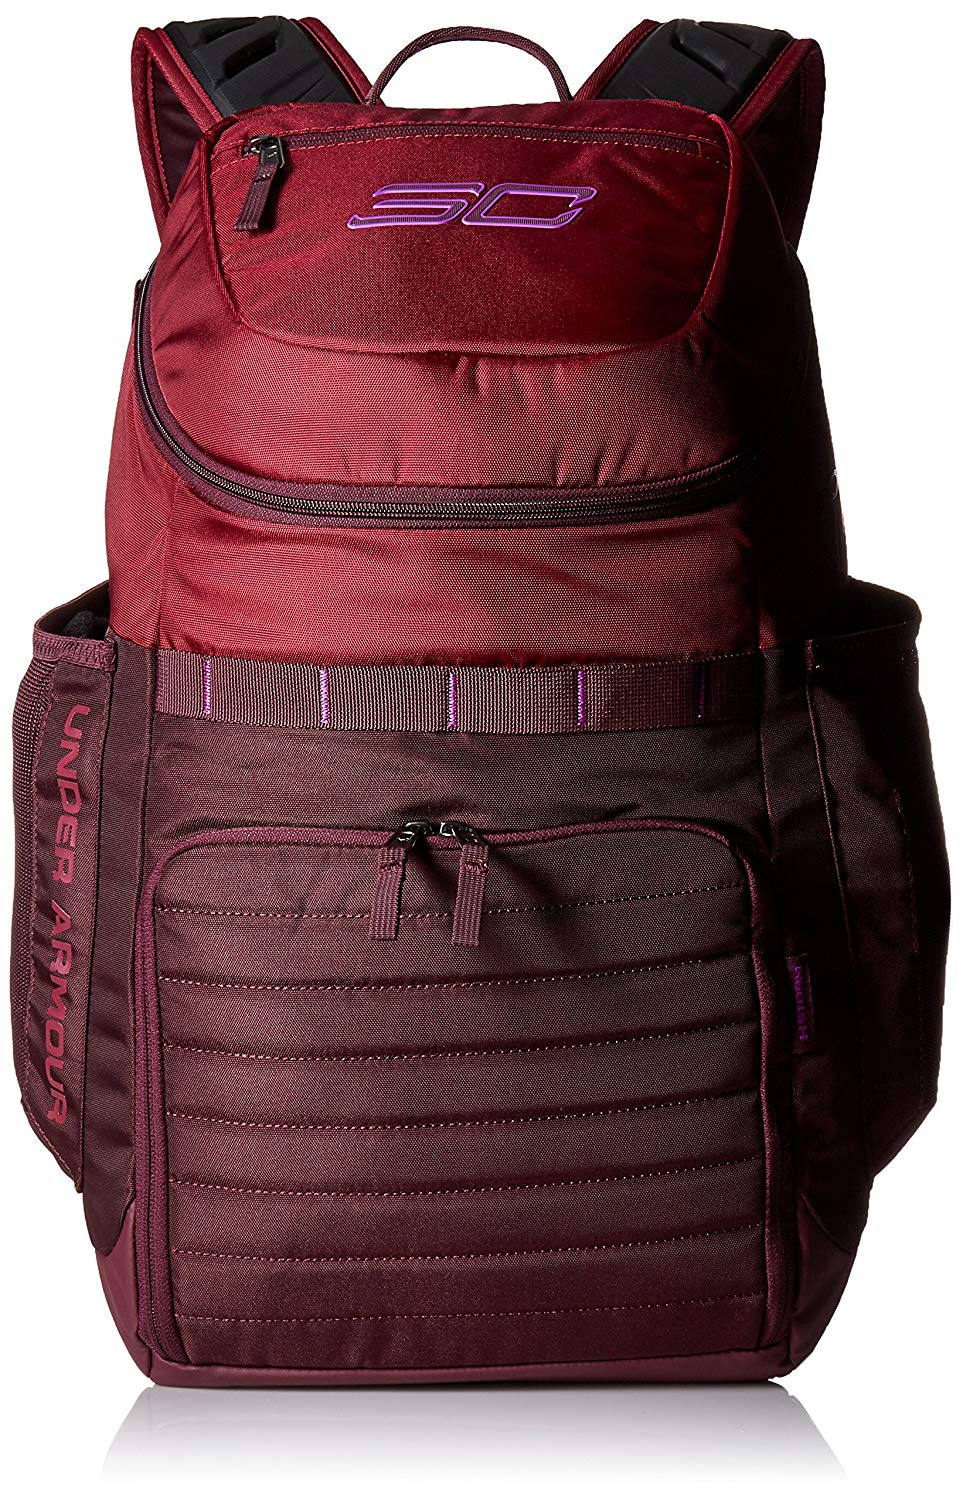 Under Armour SC30 Undeniable Backpack Only $31.25! Best Price! - Become a Coupon Queen